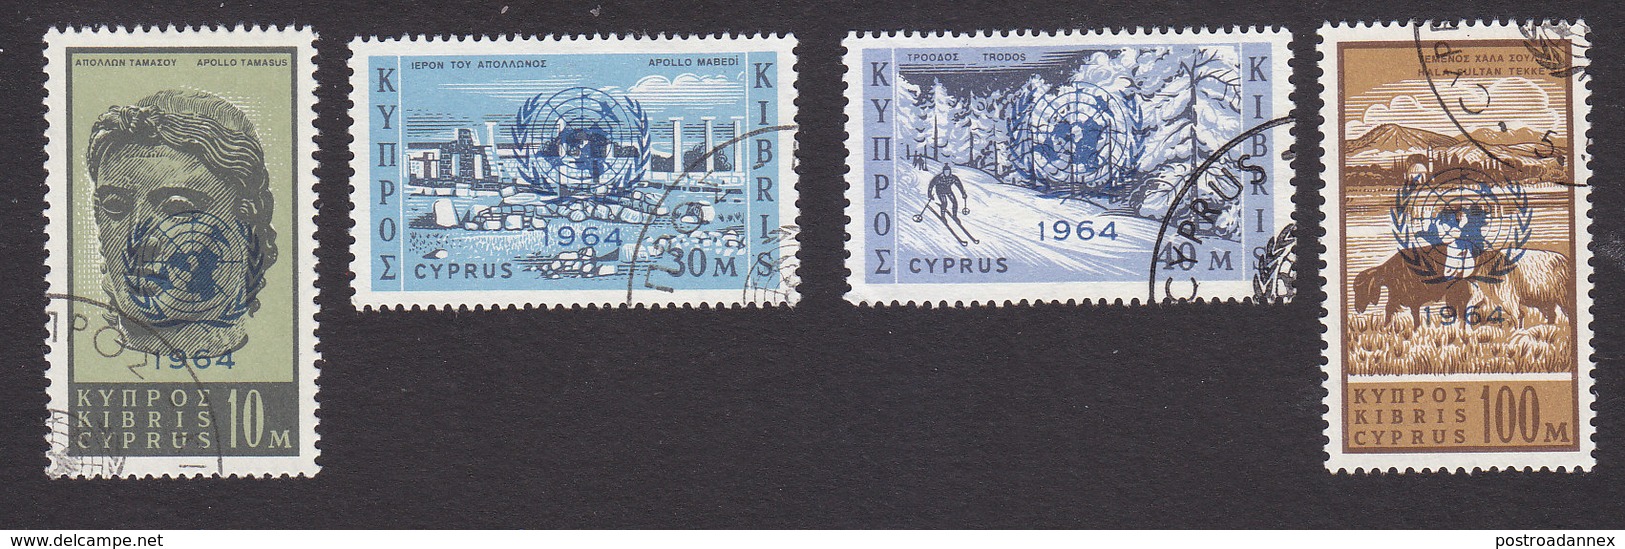 Cyprus, Scott #232-234, 236, Used, Stamps Of Cyprus With UN Overprint, Issued 1964 - Oblitérés